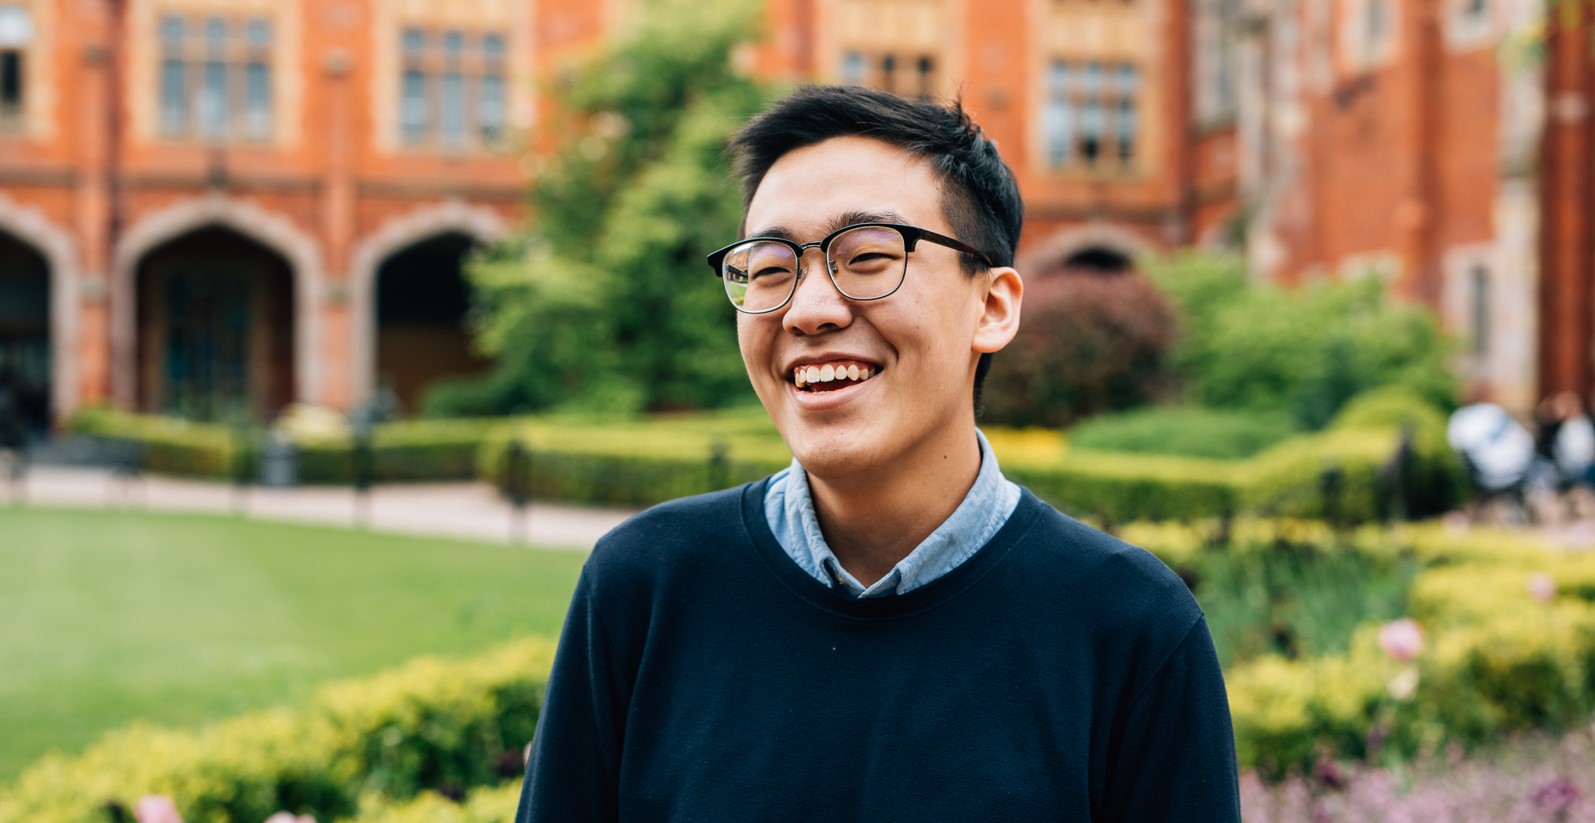 Queen's student Yi Kang Choo pictured smiling in quad at University